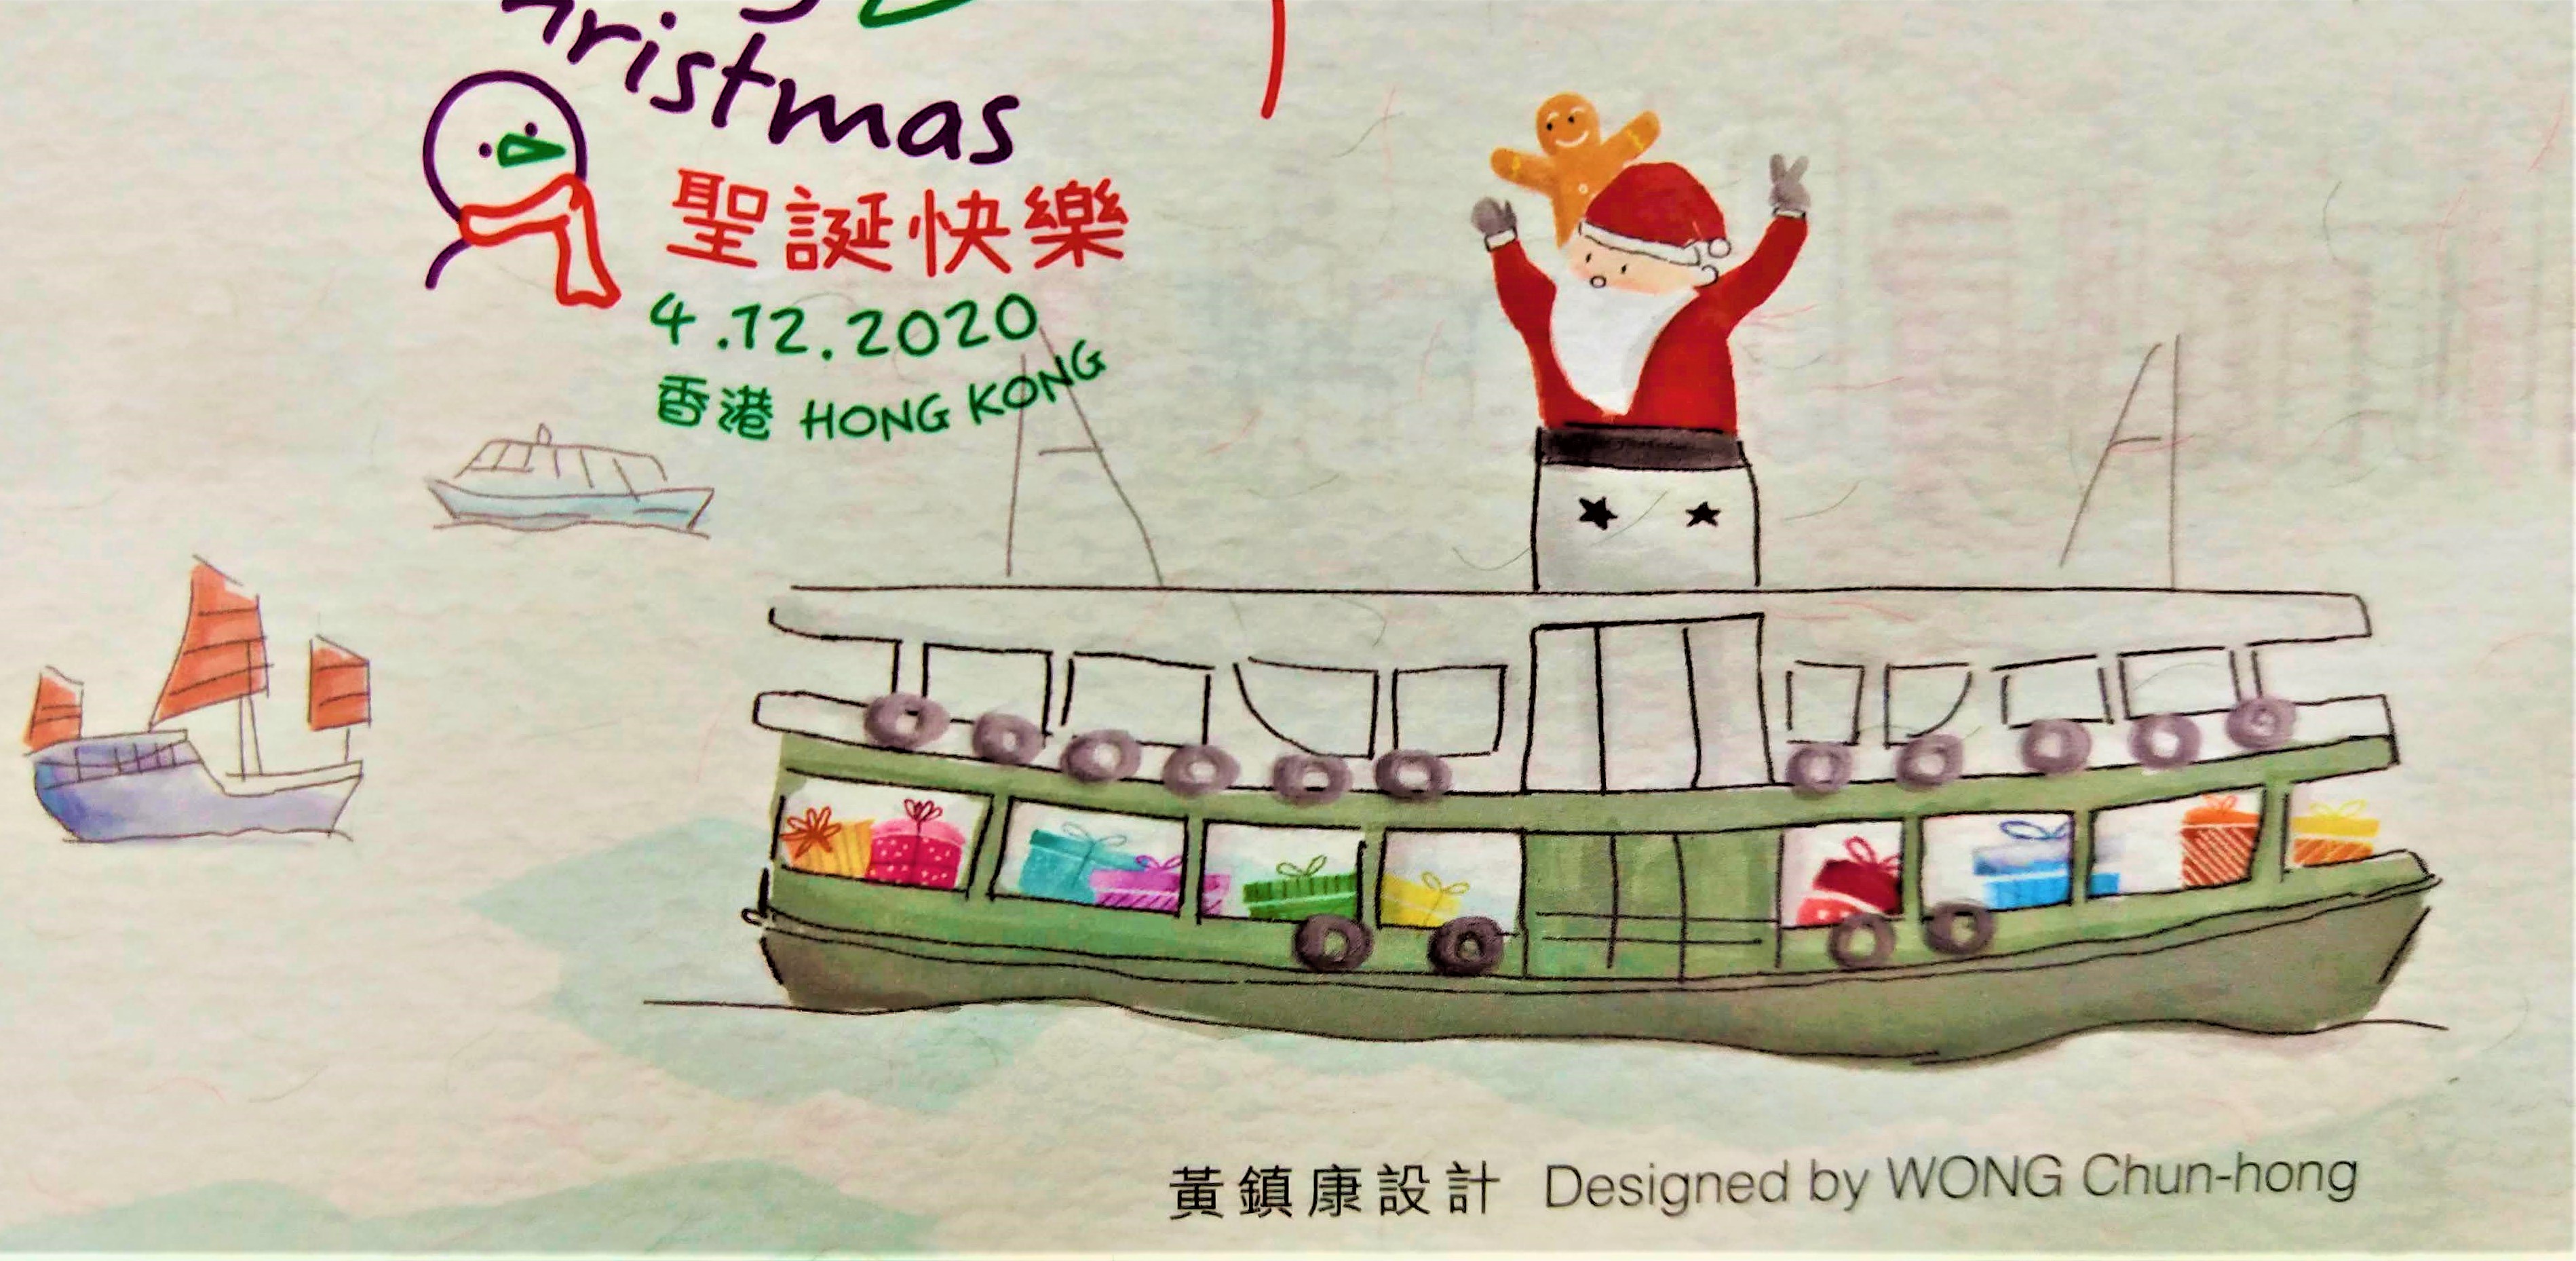 Santa Claus is at the top of the chimney of Star Ferry boat.